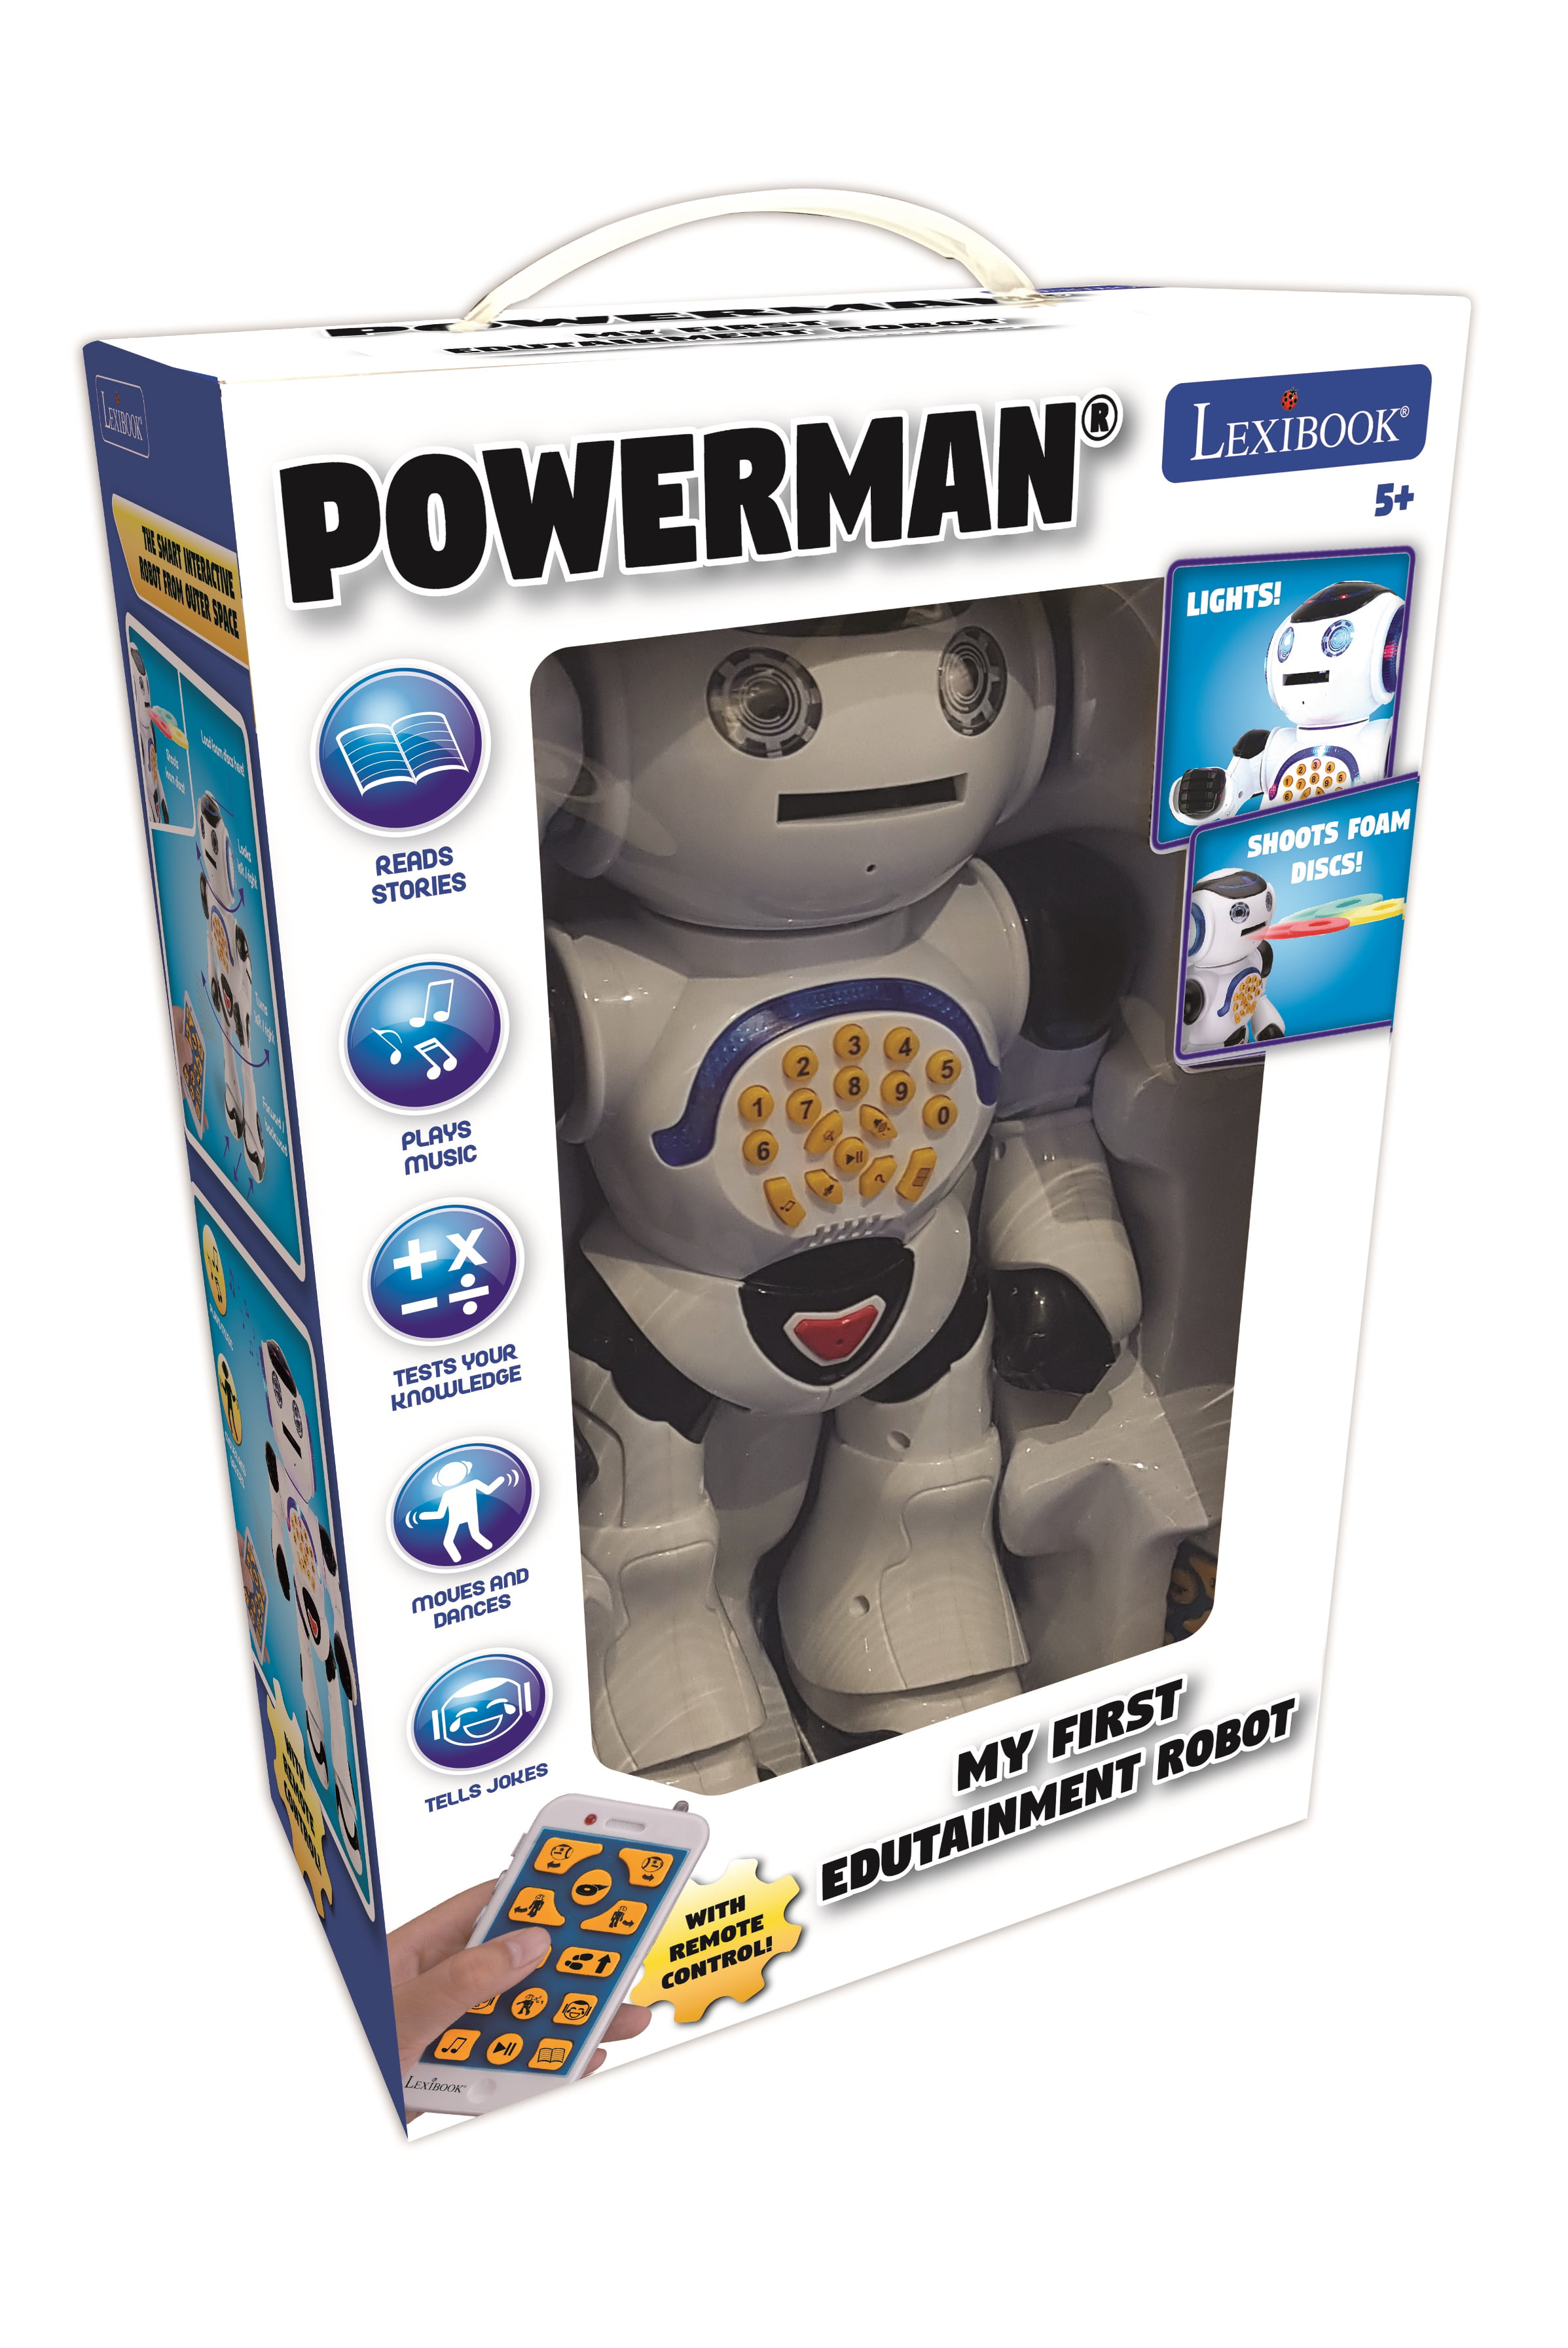 LEXiBOOK - Powerman Advance - Remote Control Robot, Interactive and  Educational Toy for Children, Walks, Dances, Plays Music, Makes and Tells  Stories